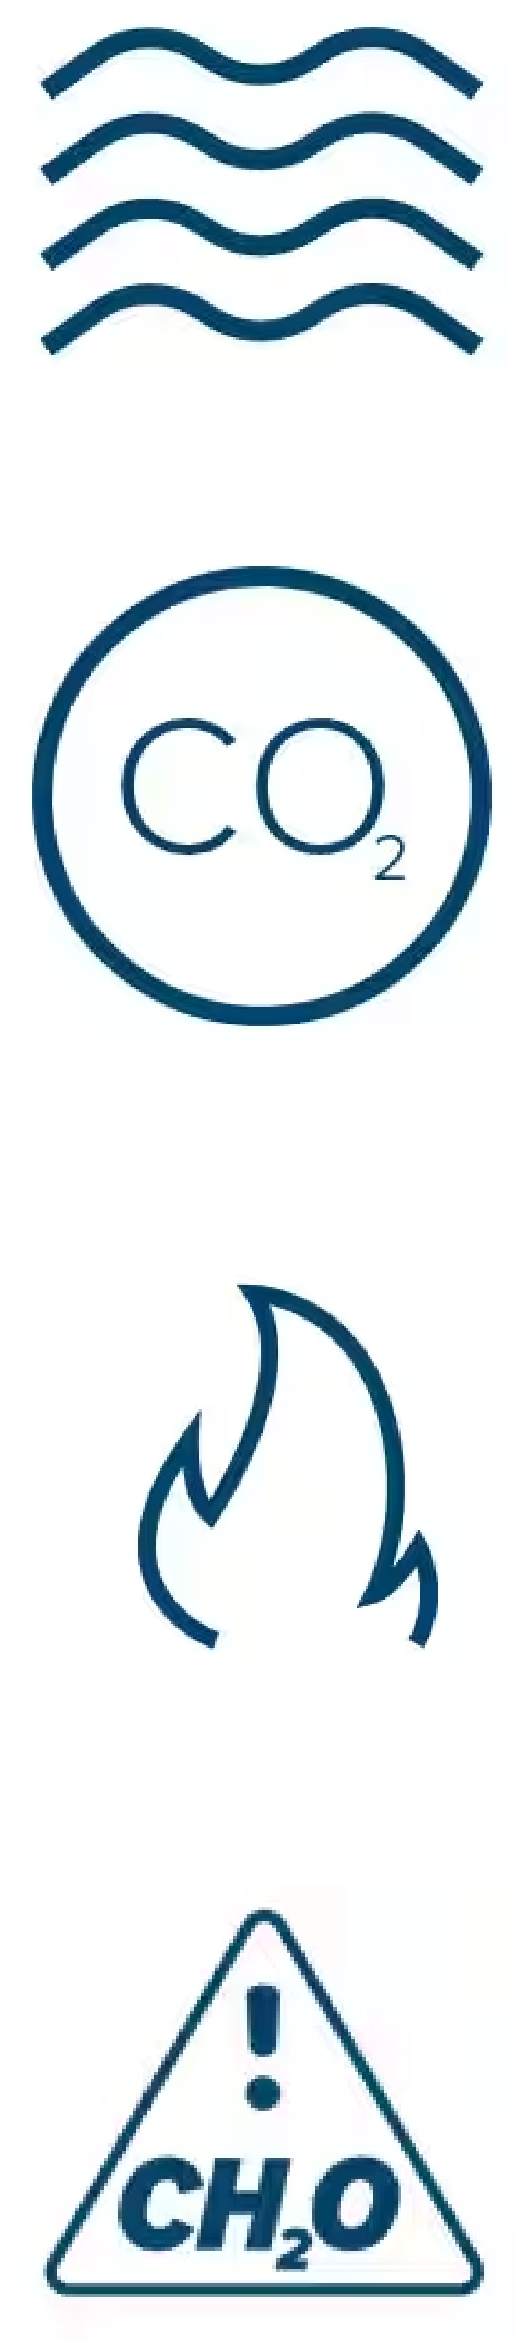 From top to bottom: icon showing four wavy blue lines to indicate humidity; icon of a circle with the text CO2 inside; icon of flame to indicate volatile organic compounds; icon of a triangle with an exclamation point inside it and CH2O written underneath it to indicate formaldehyde.